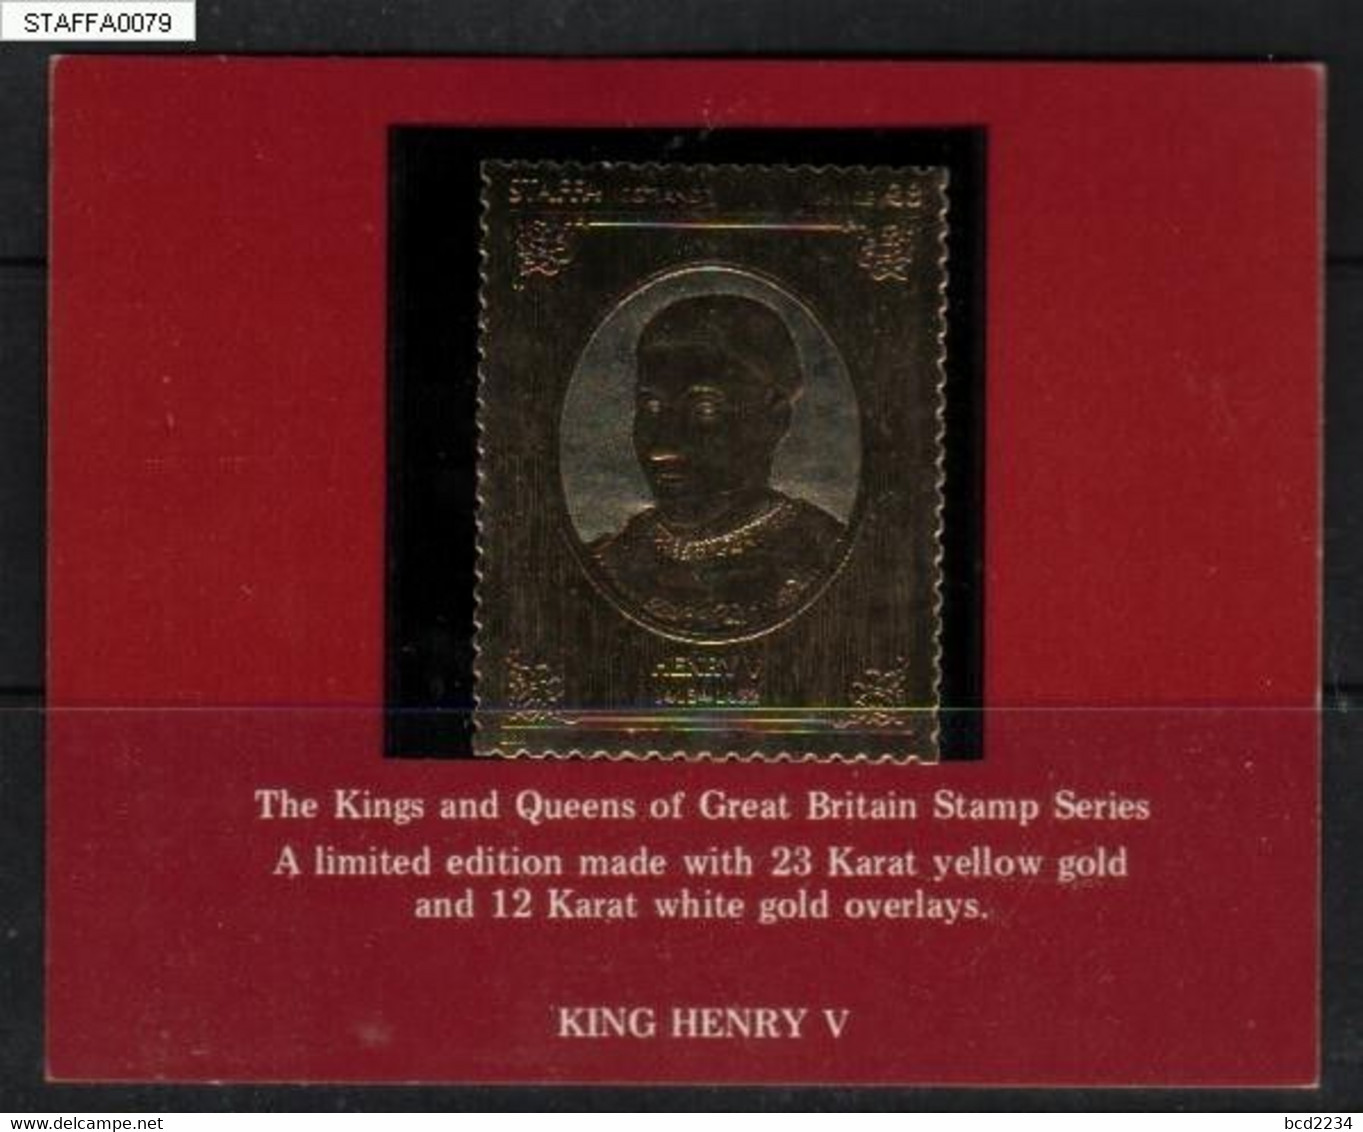 GB STAFFA £8 GOLD 23 KARAT FOIL KINGS QUEENS OF GREAT BRITAIN KING HENRY V LOCALS ROYALS ROYALTIES ISLAND SCOTLAND - Emissions Locales